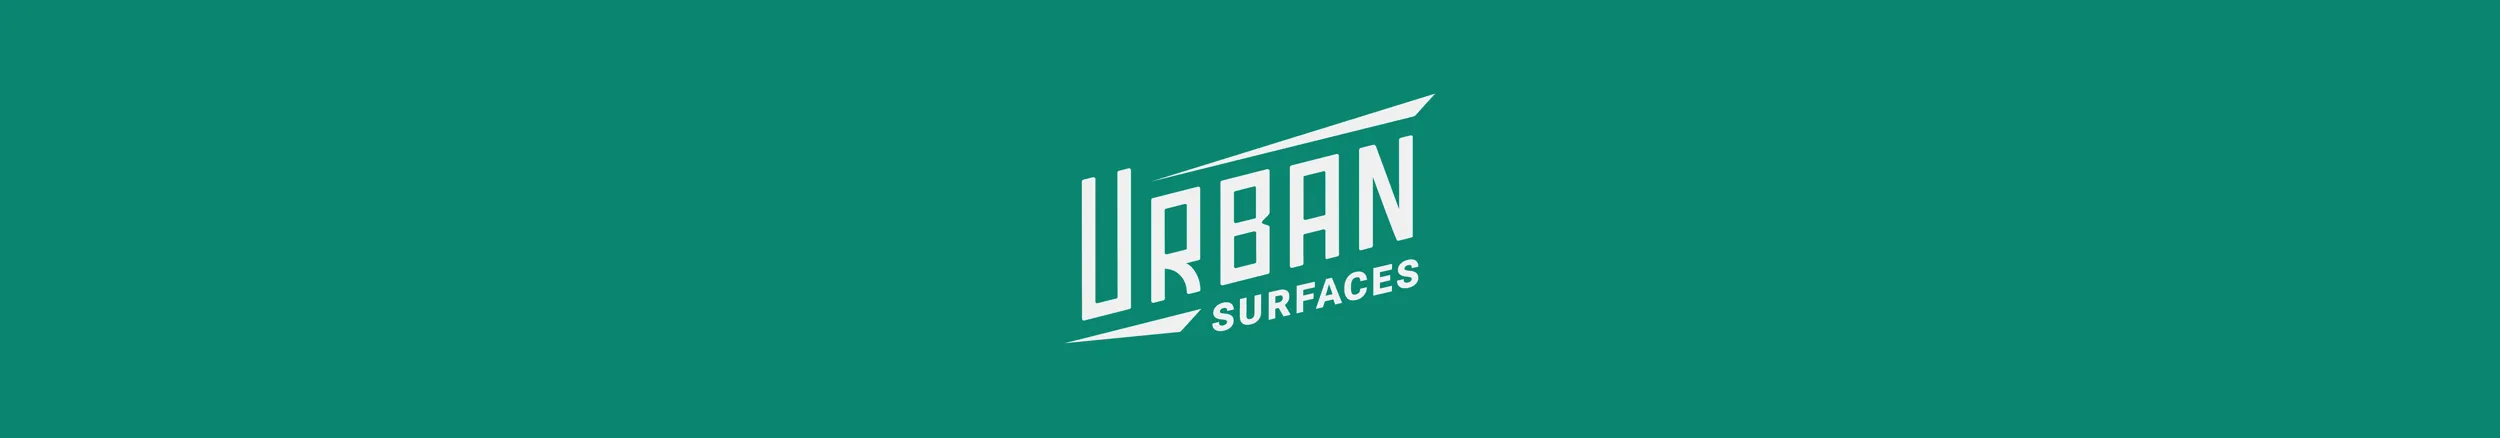 An image with the Urban Surfaces logo on a green background, representing the conclusion of the discussion on office-to-residential conversions.